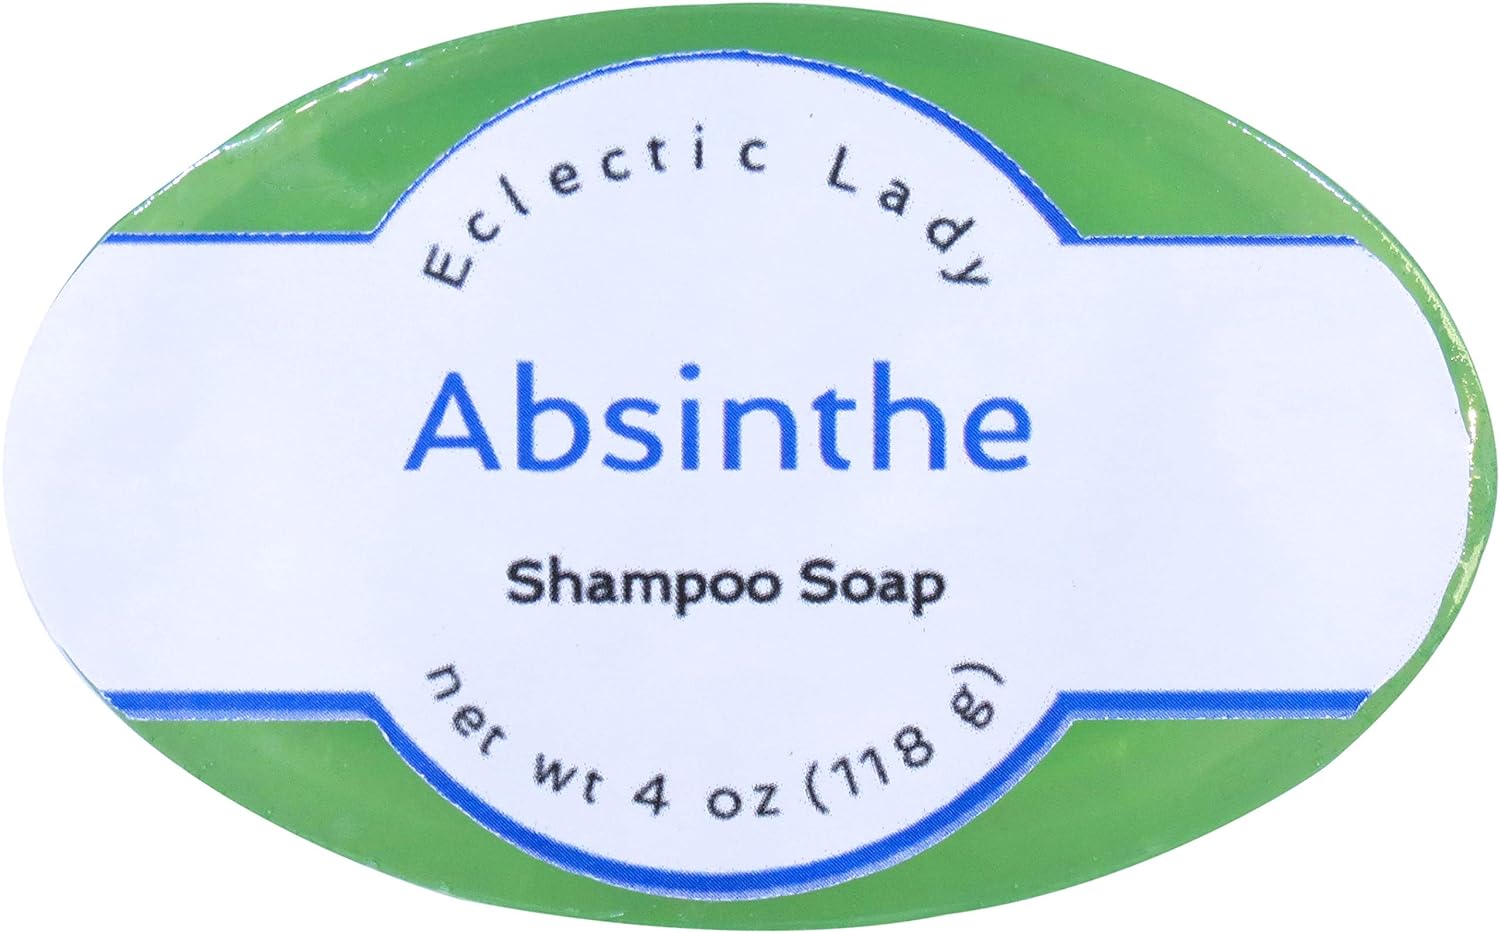 Eclectic Lady Absinthe Shampoo Soap Bar with Pure Argan Oil, Silk Protein, Honey Protein and Extracts of Calendula ower, Aloe, Carrageenan, Sunower - 4  Bar